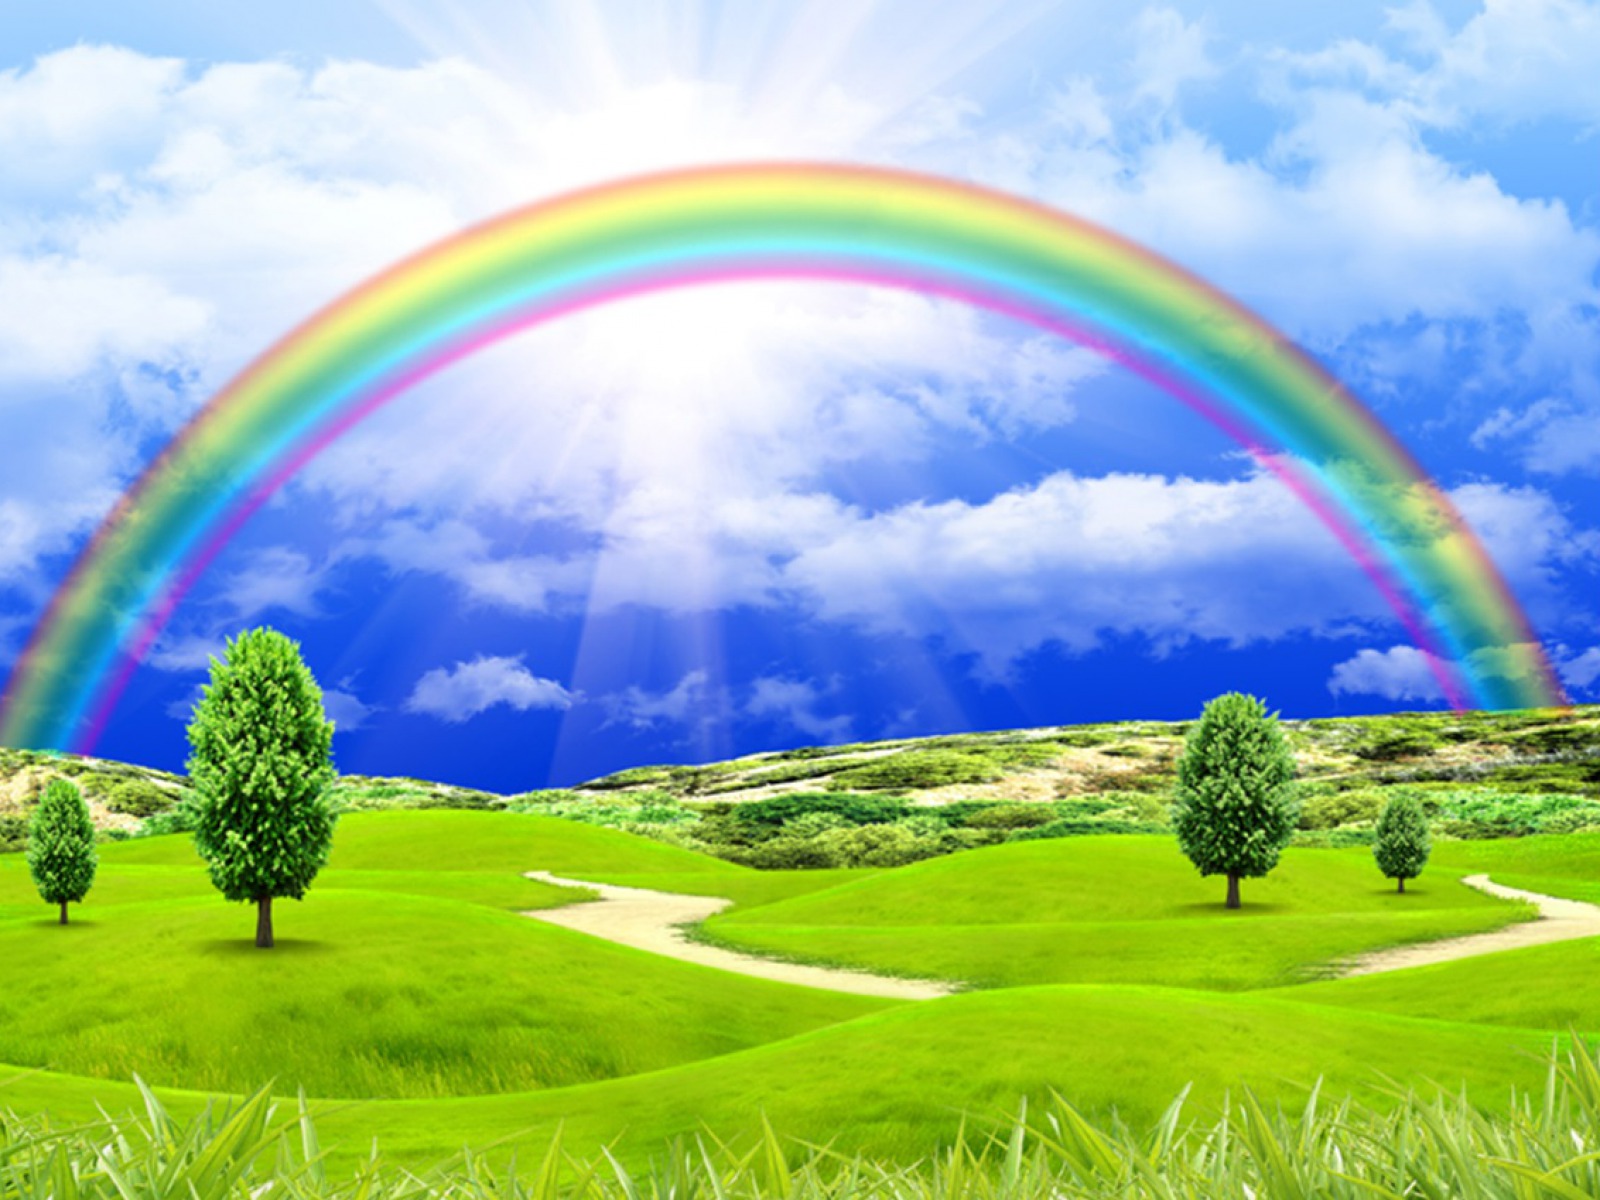 Animated Tree Wallpaper Backgrounds Rainbow Download Hd Picture Wallpaper  Background Image And Wallpaper for Free Download